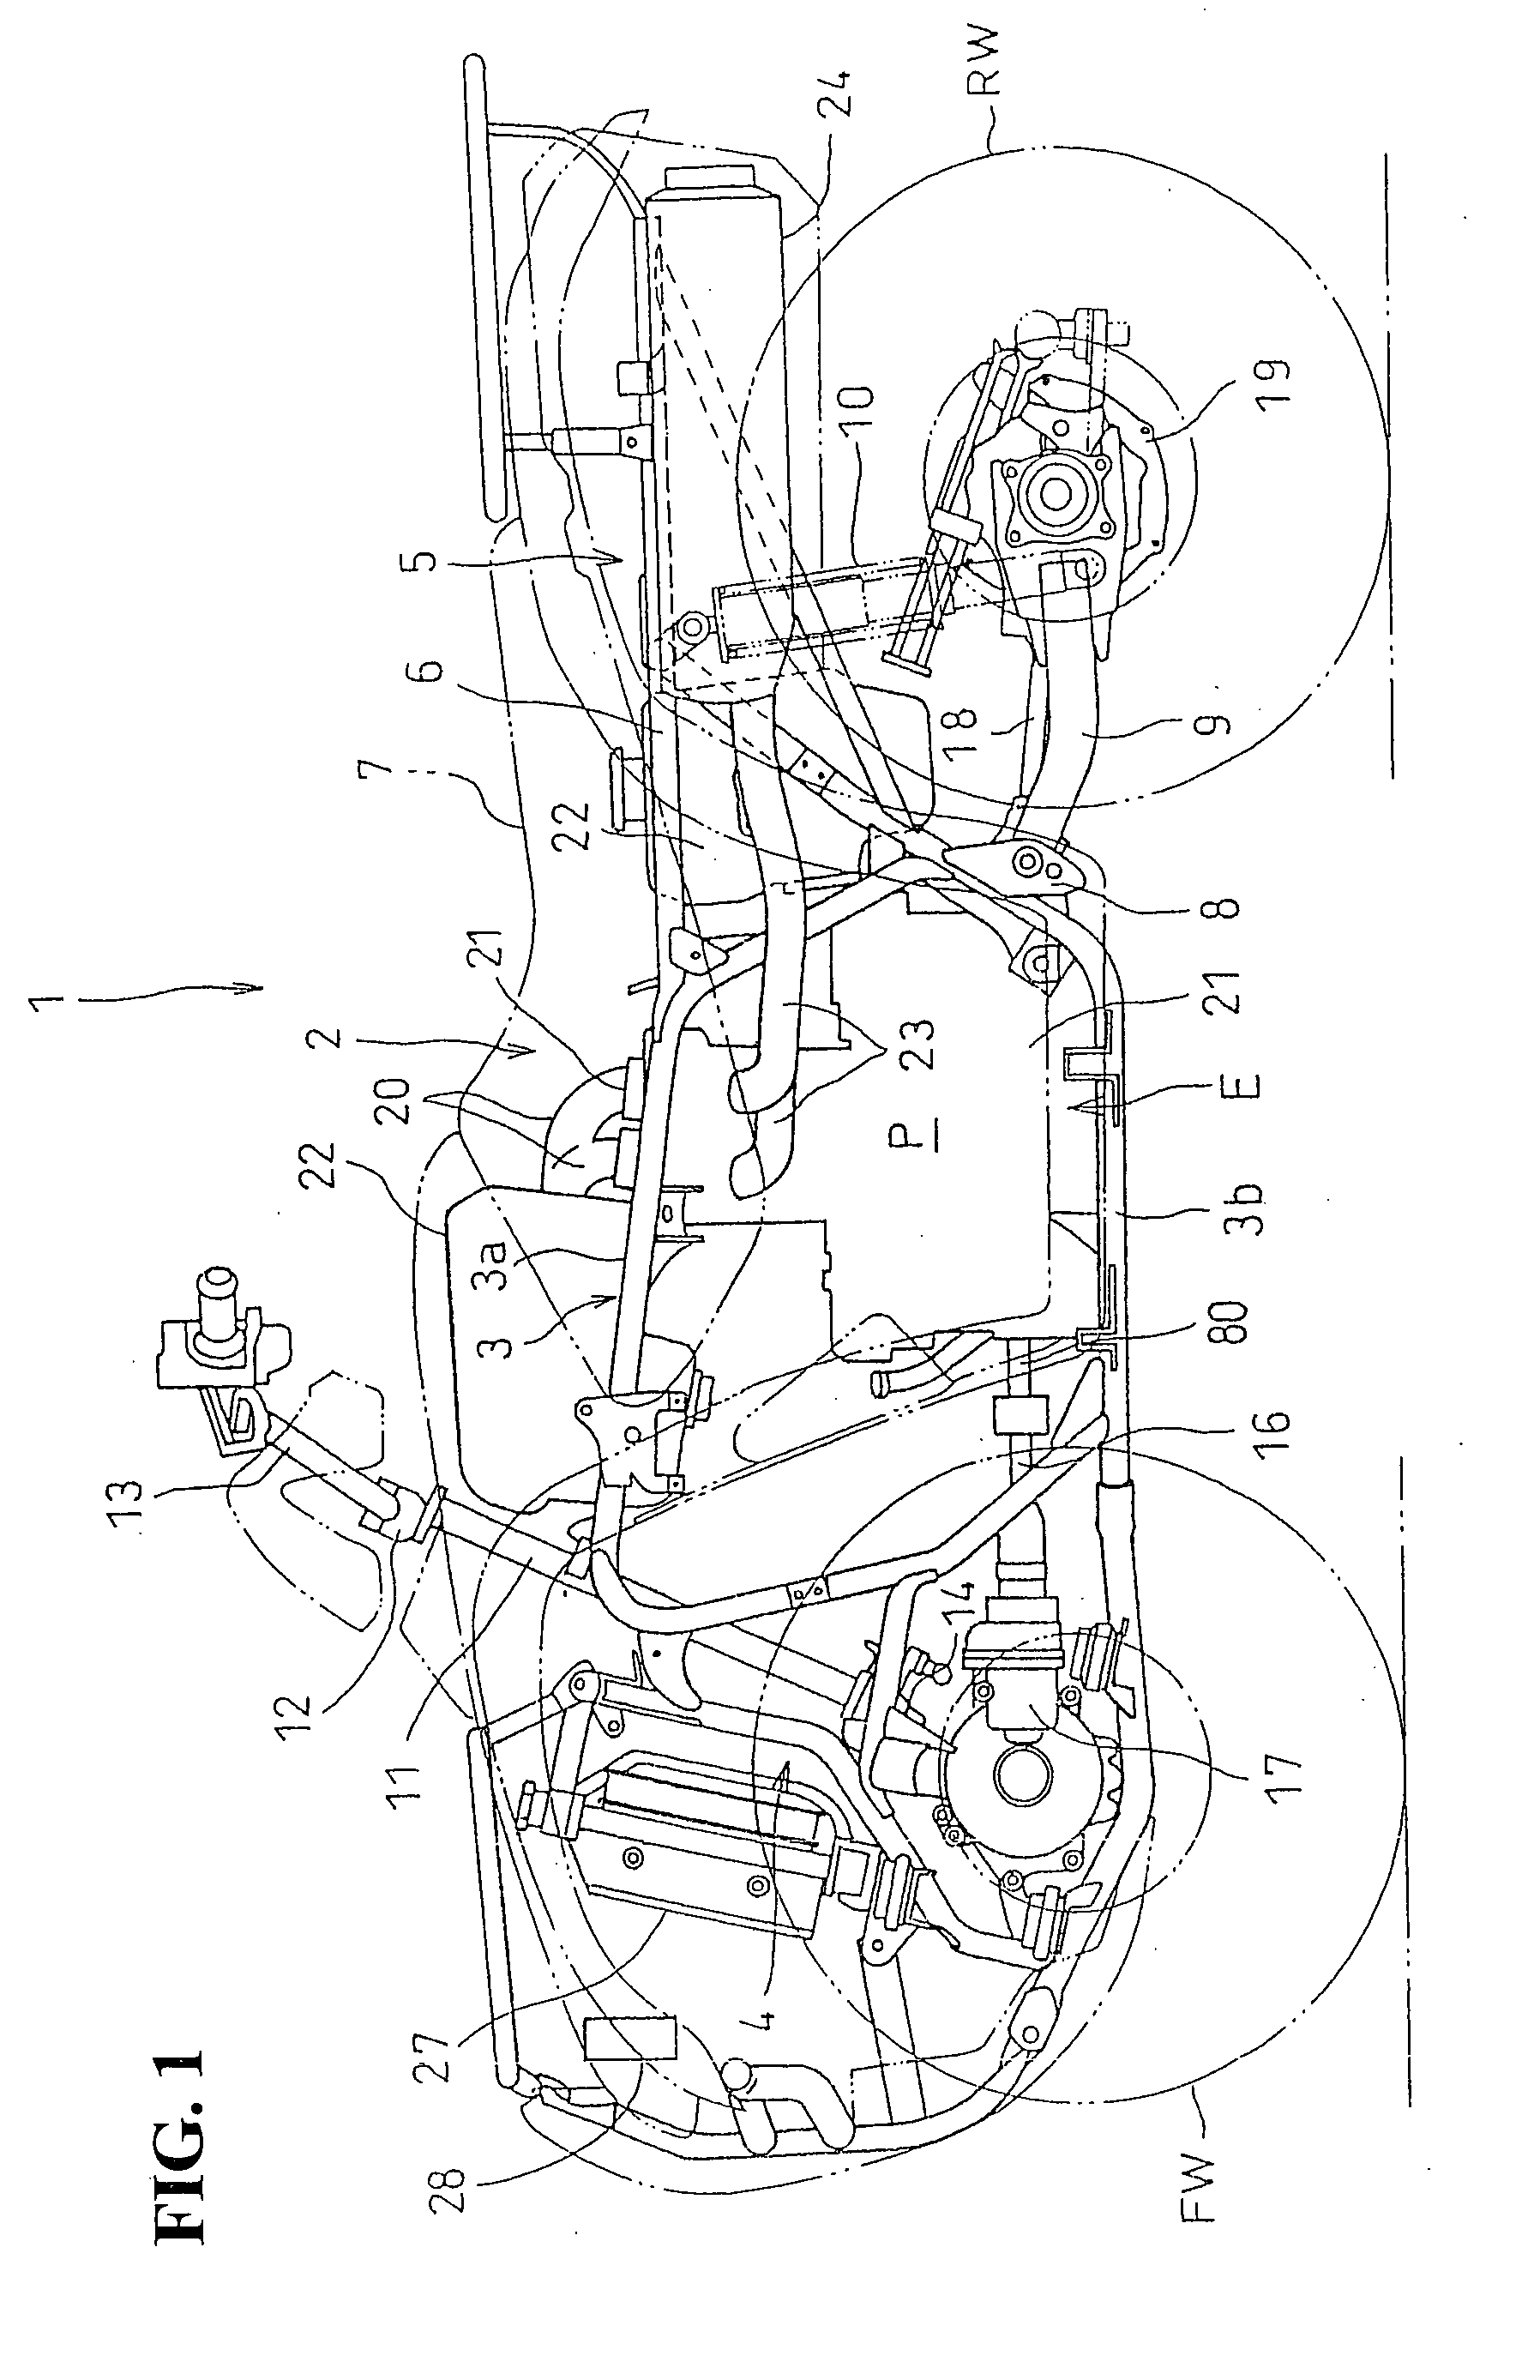 Oil filter mounting structure in internal combustion engine